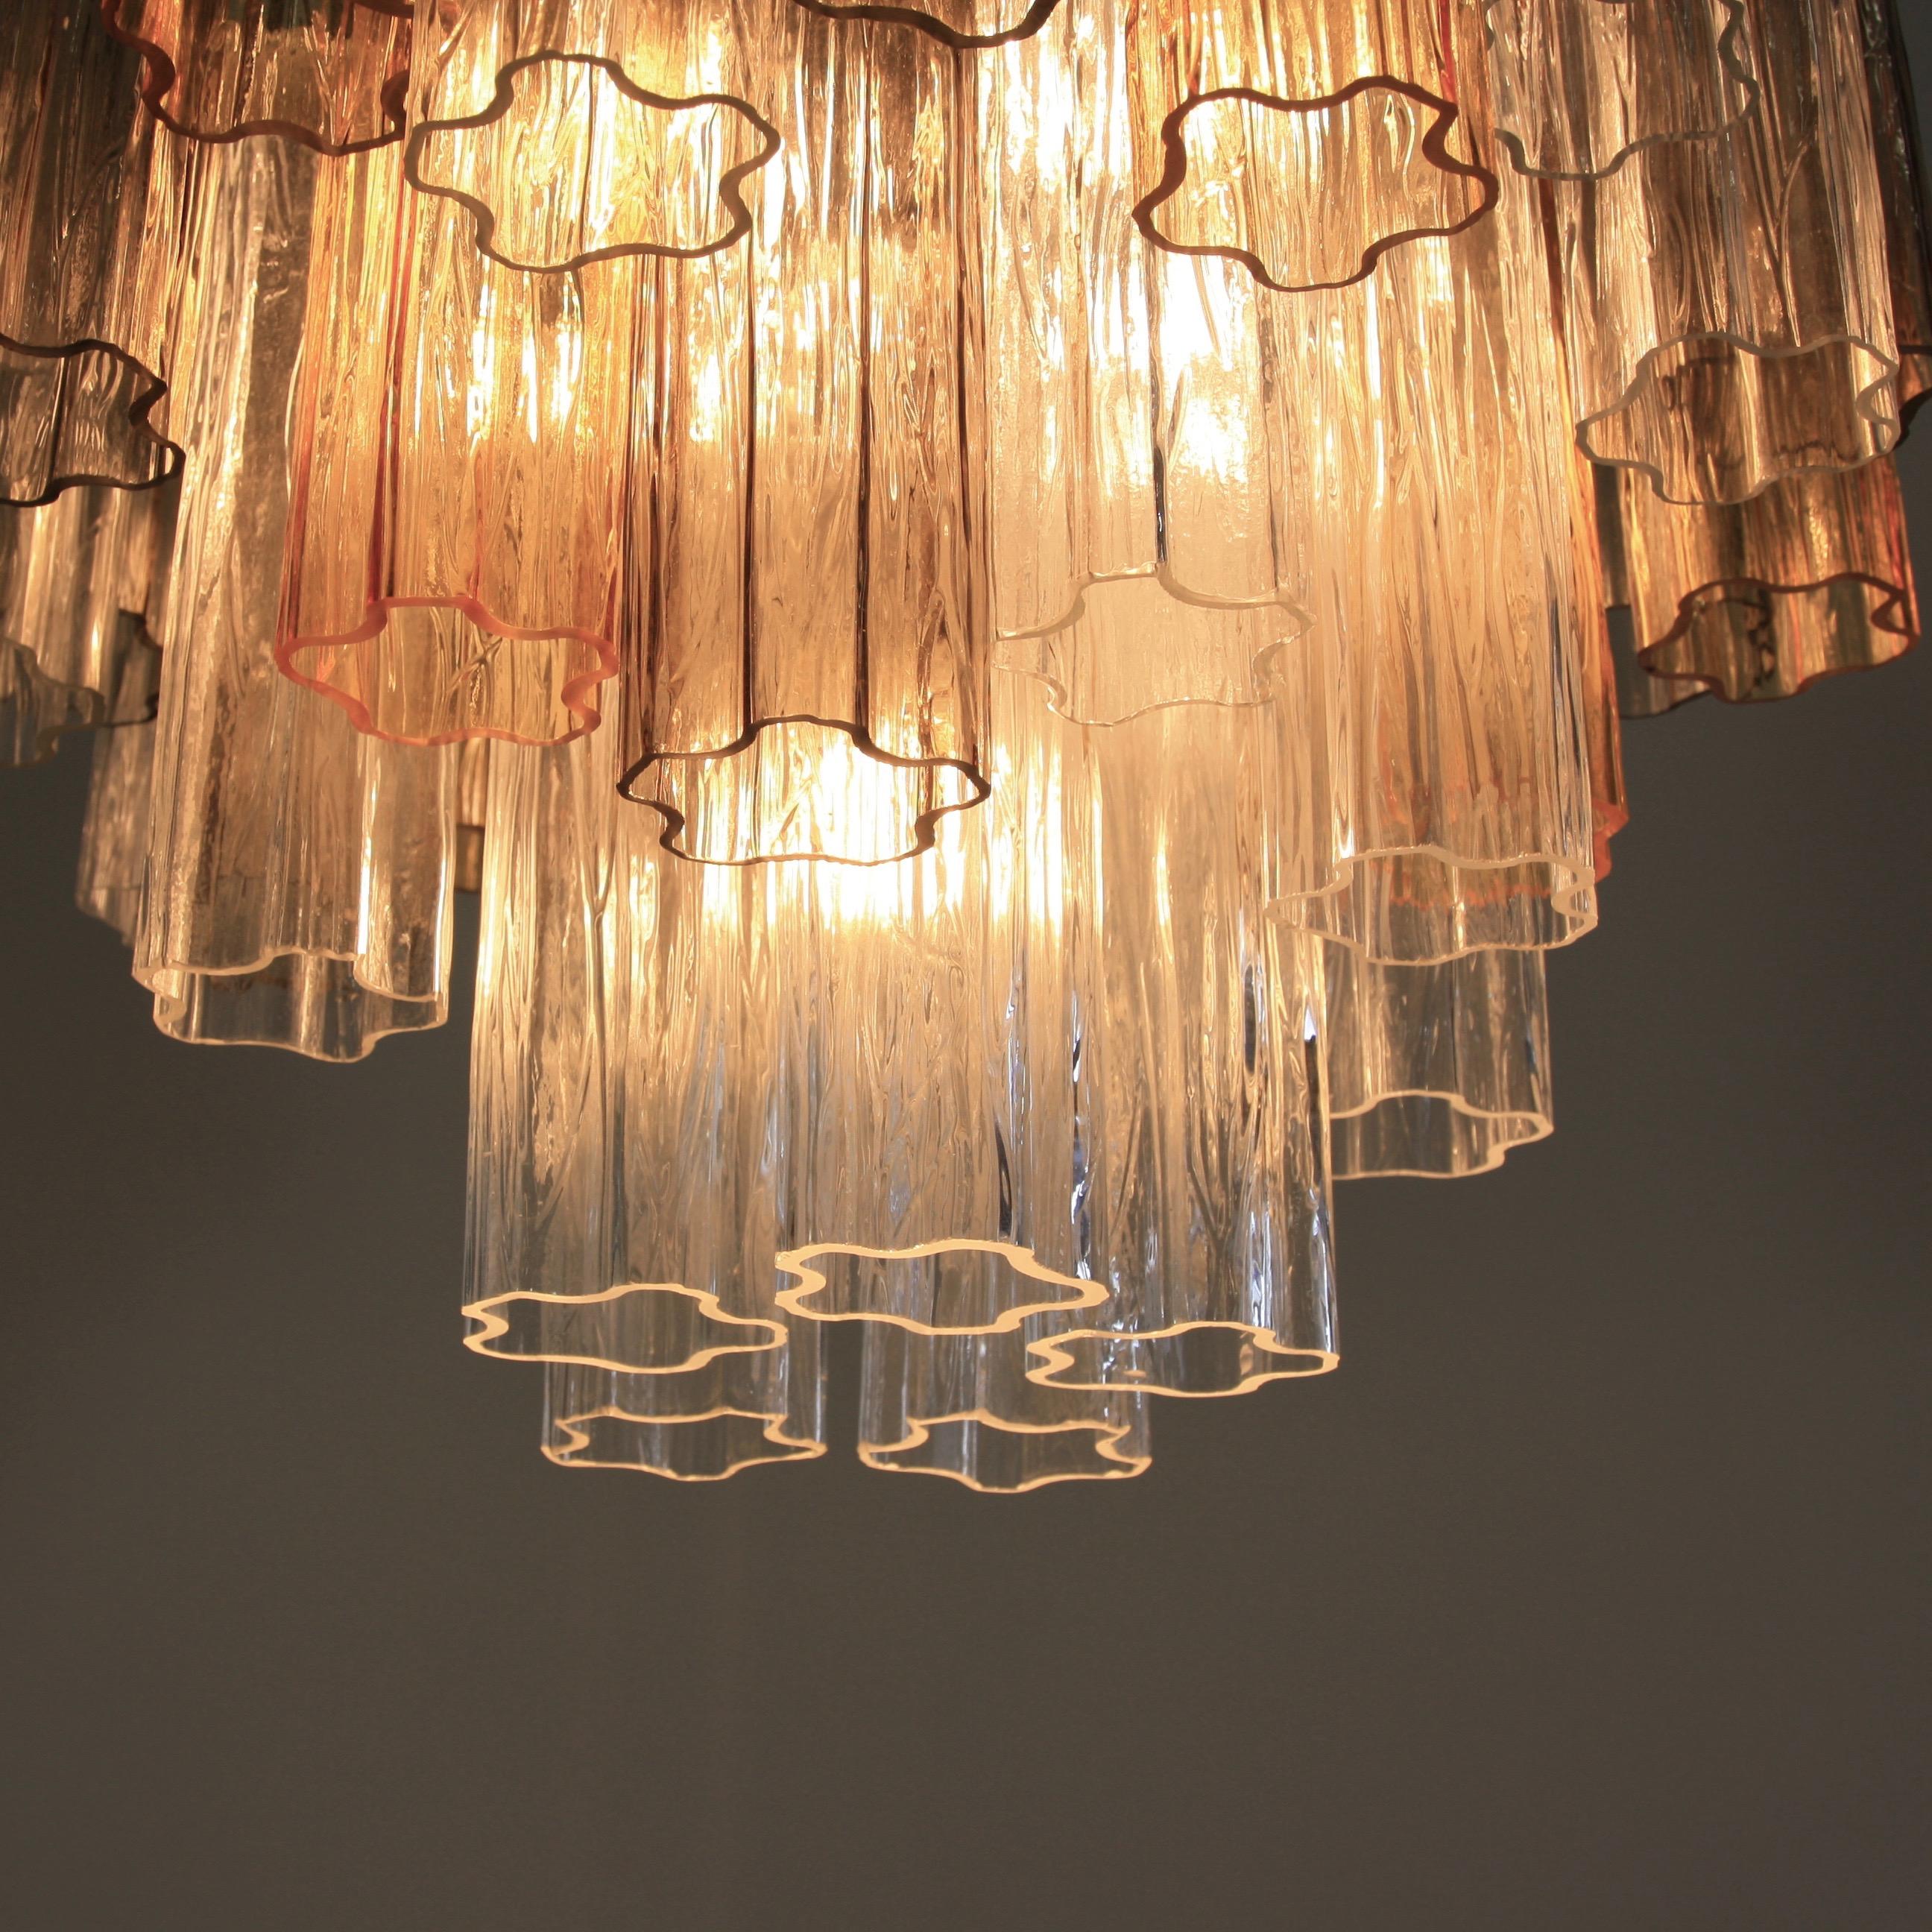 Chandelier with star shaped 'Tronchi' glass pieces, Murano, Italy.

White metal structure with well over 50 Murano glass pieces in yellow, brown and clear. Arranged over three layers. With five-light fittings.